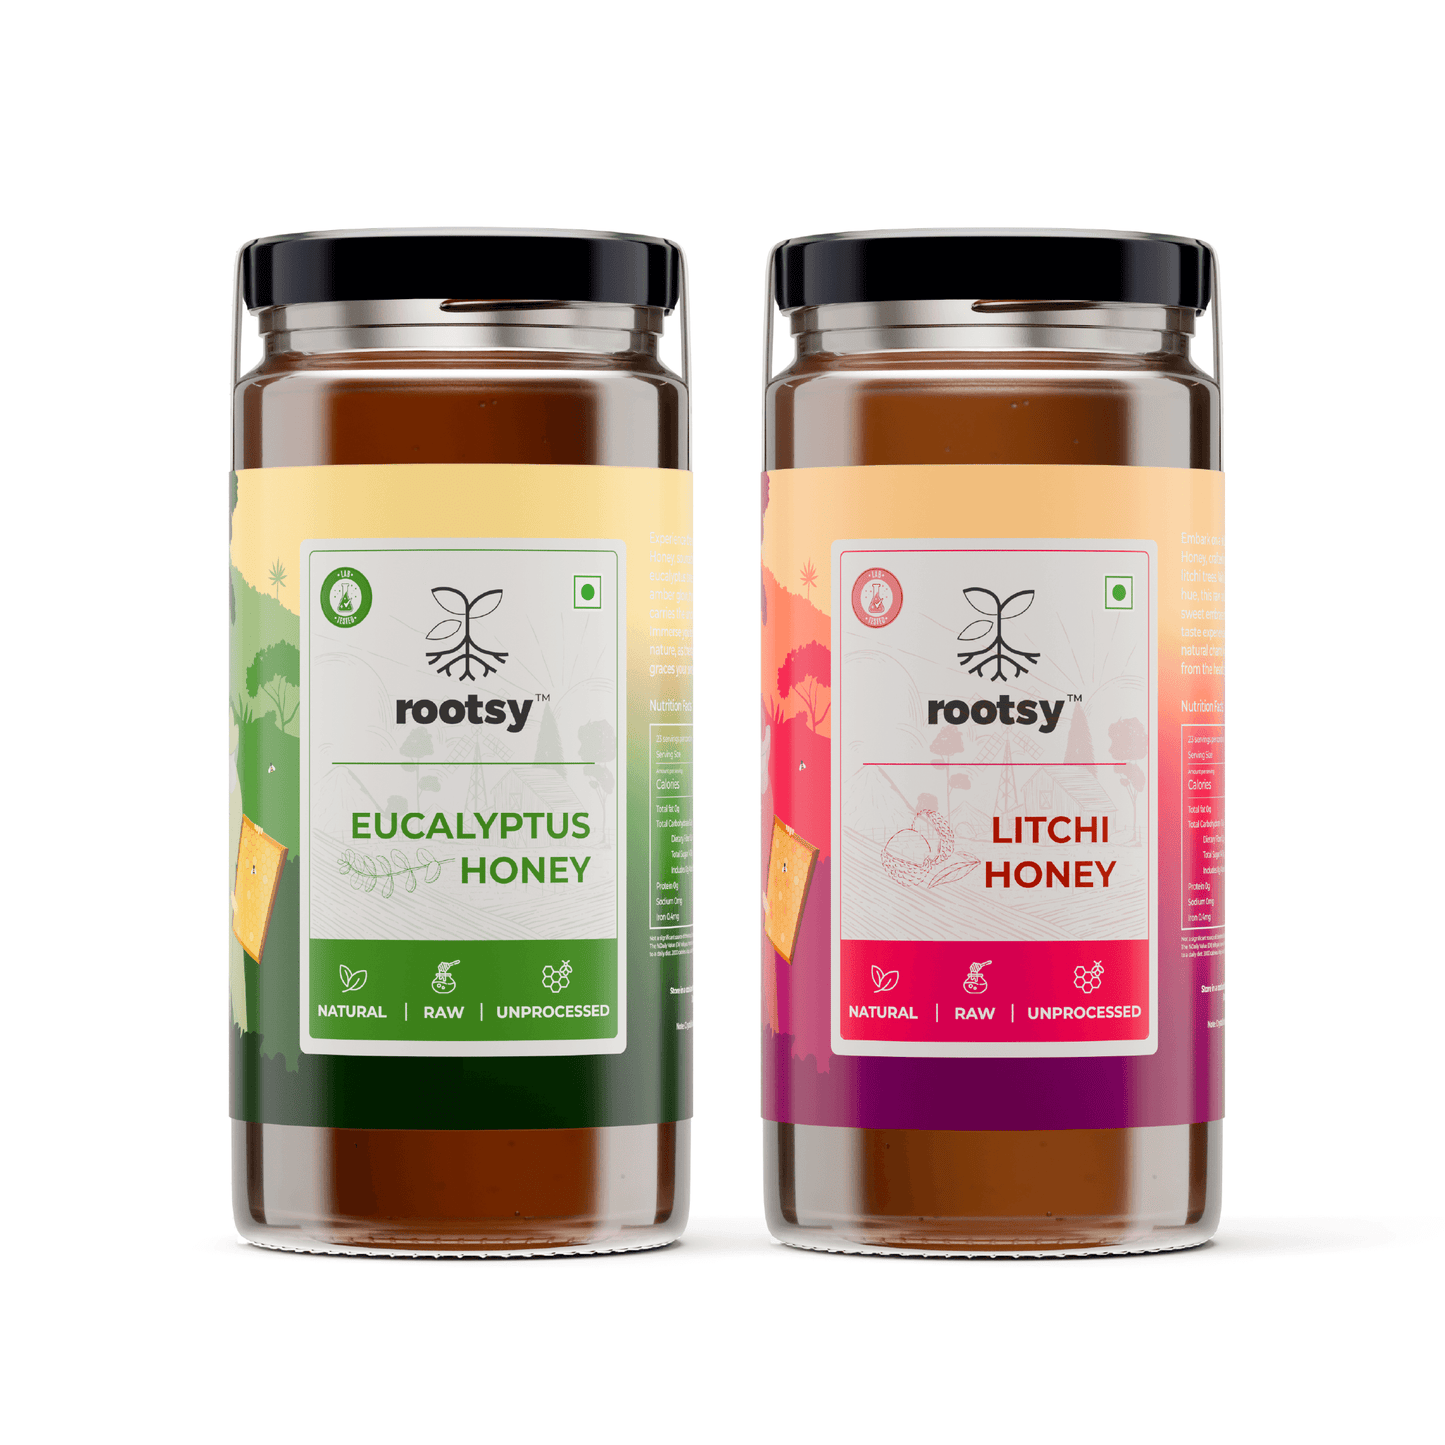 Rootsy Raw Eucalyptus Honey and Litchi Honey Pack of 2 (500g Each)